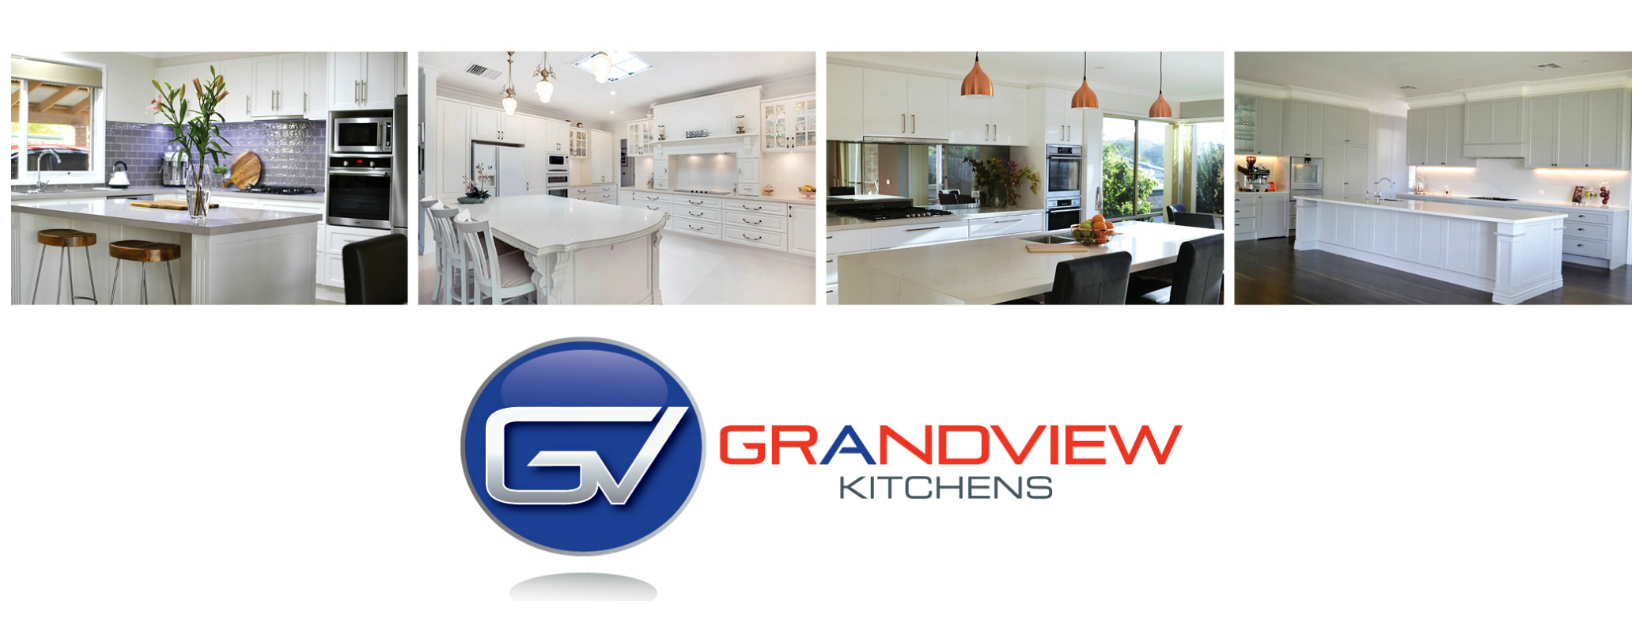 Grandview Kitchens Melbourne Down The Road